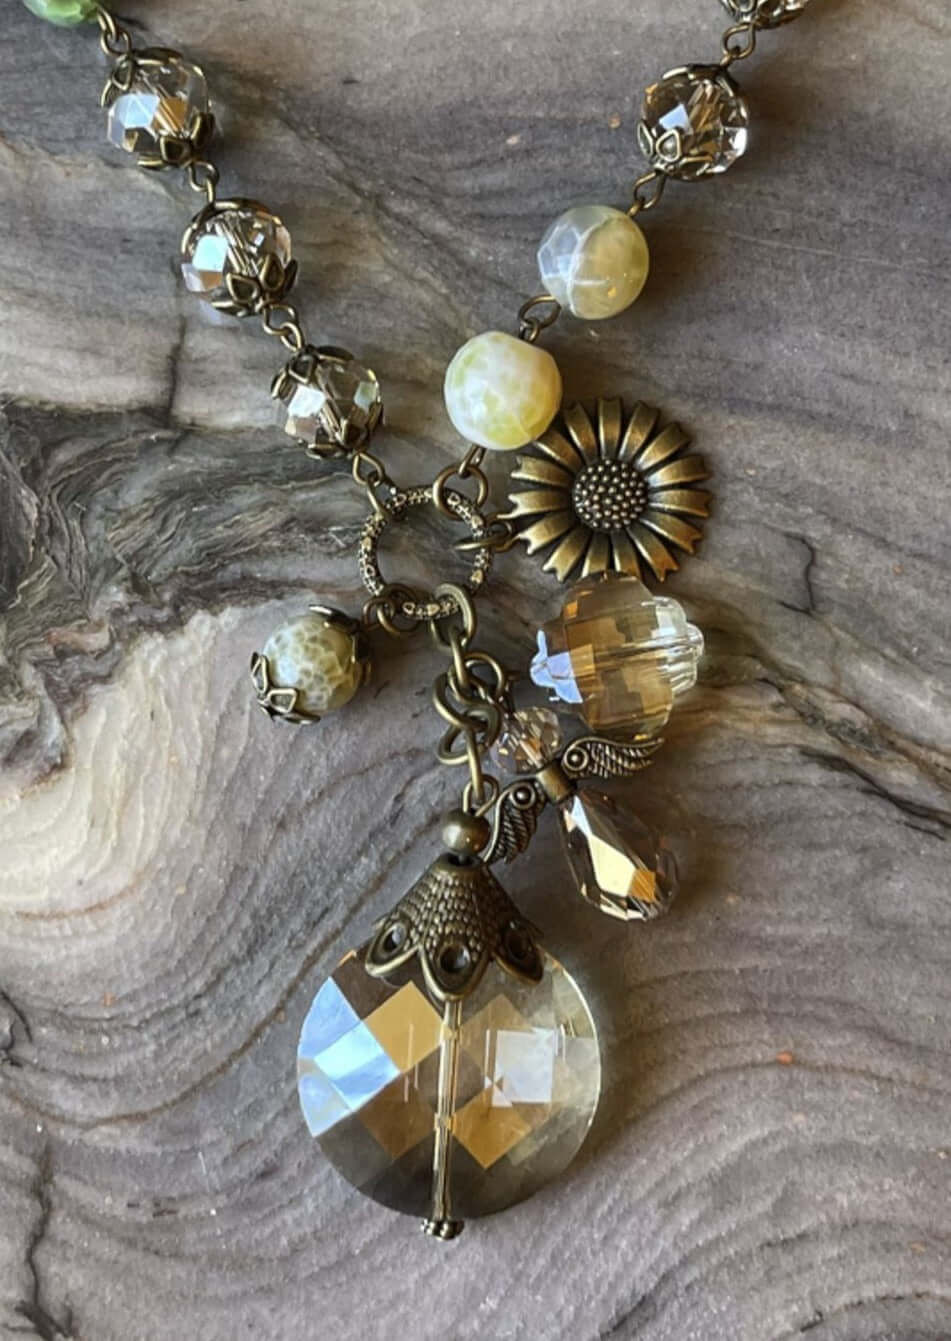 Natural Stone & Glass Charm Necklace with Sunflower Charm